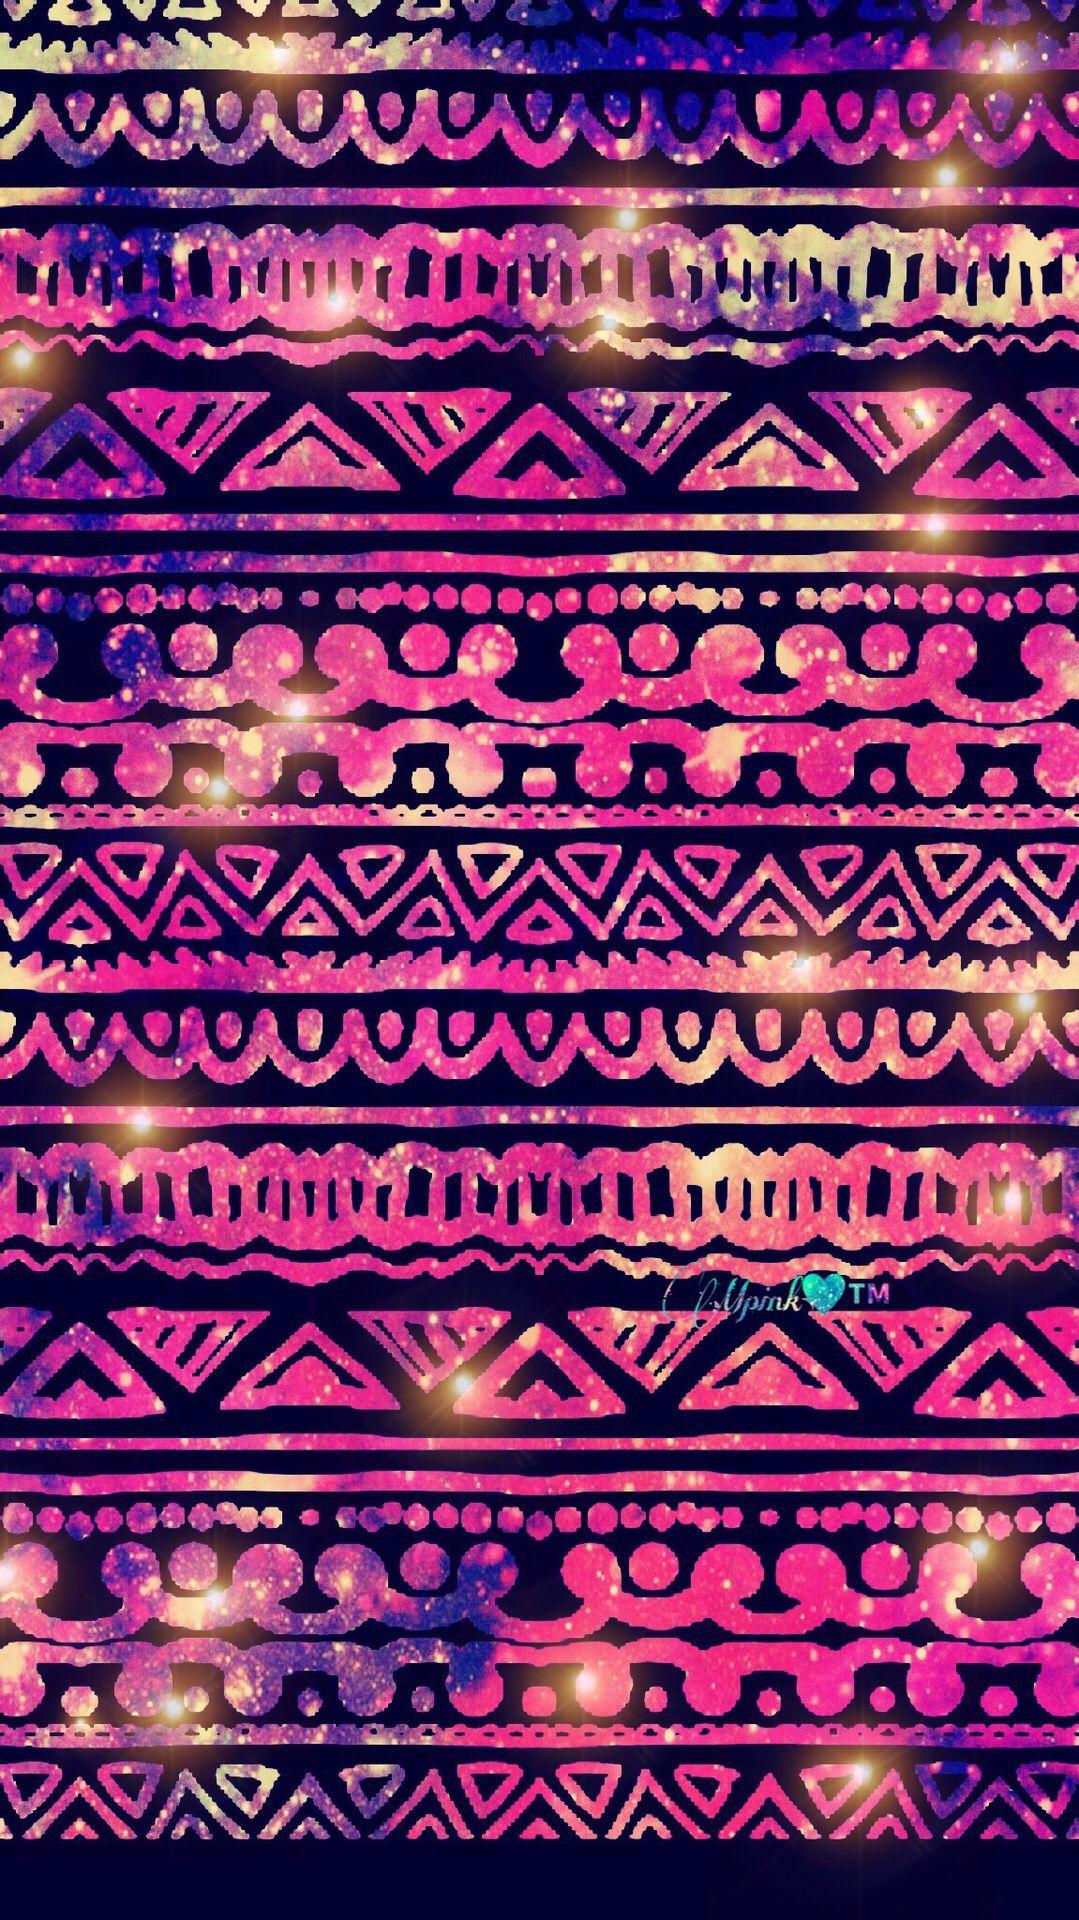 Tribal Iphone Wallpapers